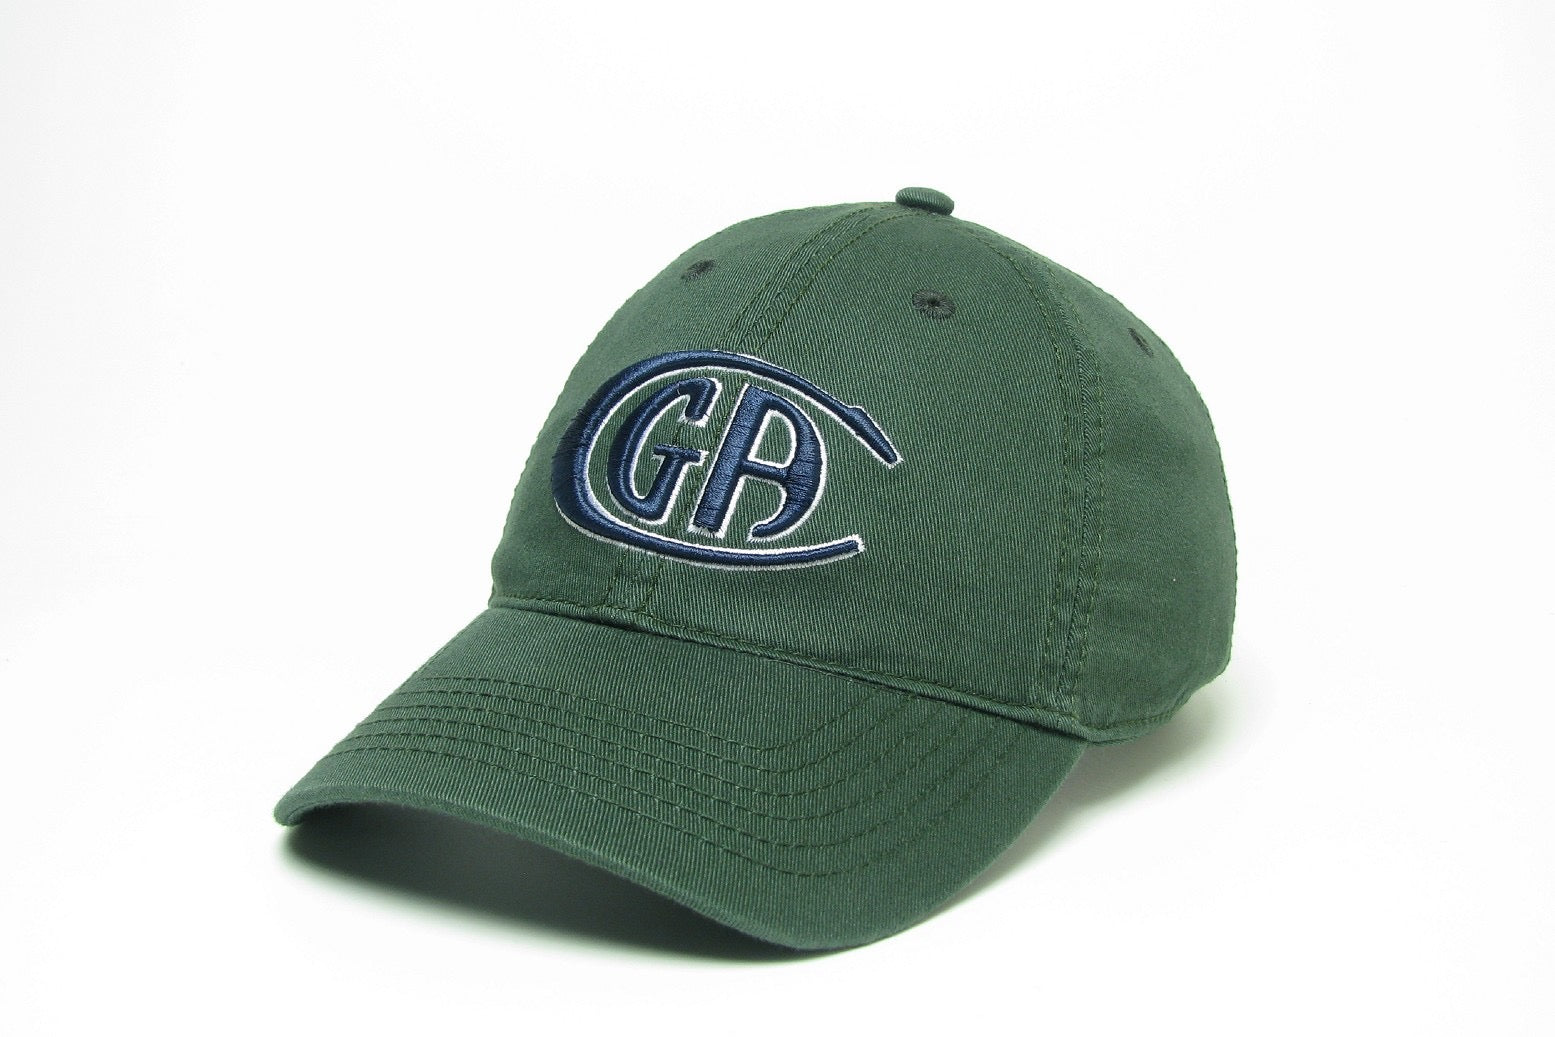 CGA Relaxed Twill Adjustable Hat - Green